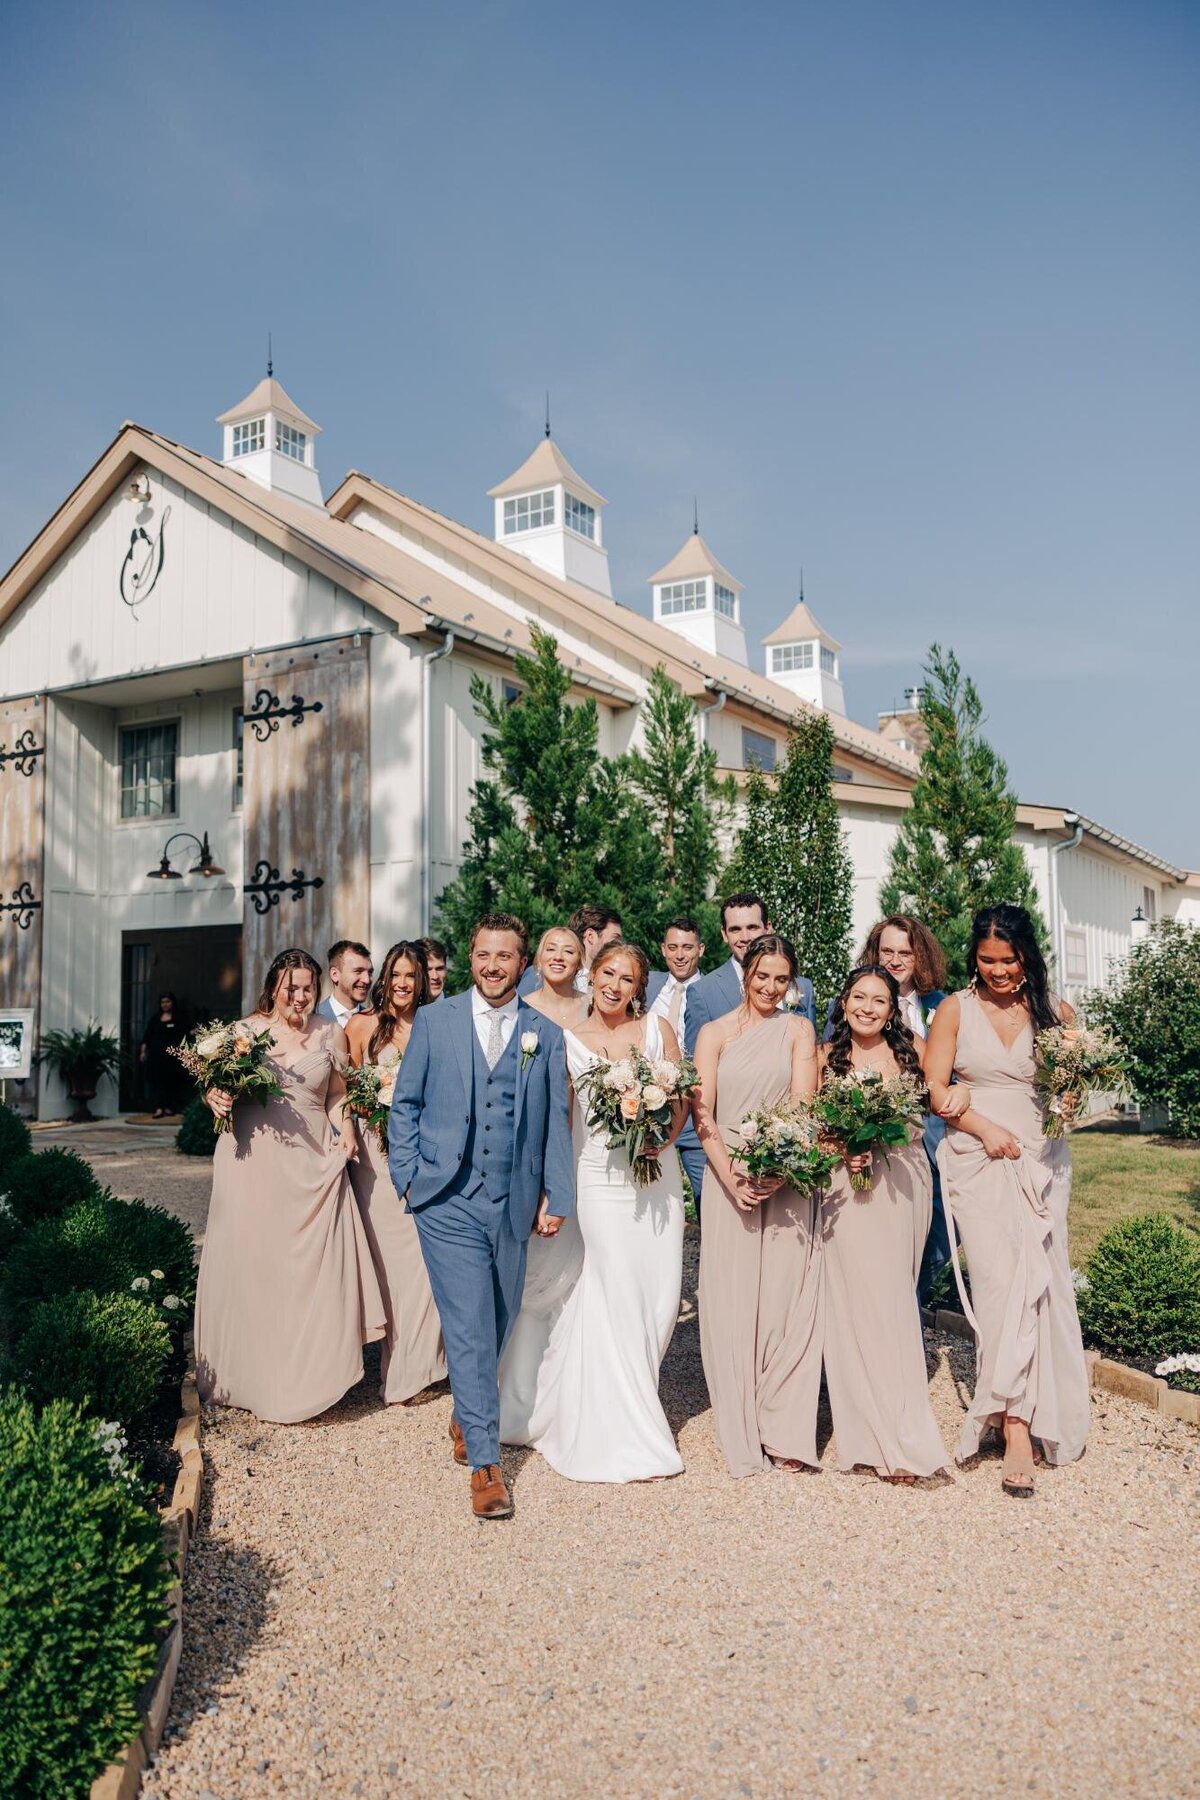 A wedding party posing outside a venue, with the bride and groom leading the group followed by bridesmaids and groomsmen.